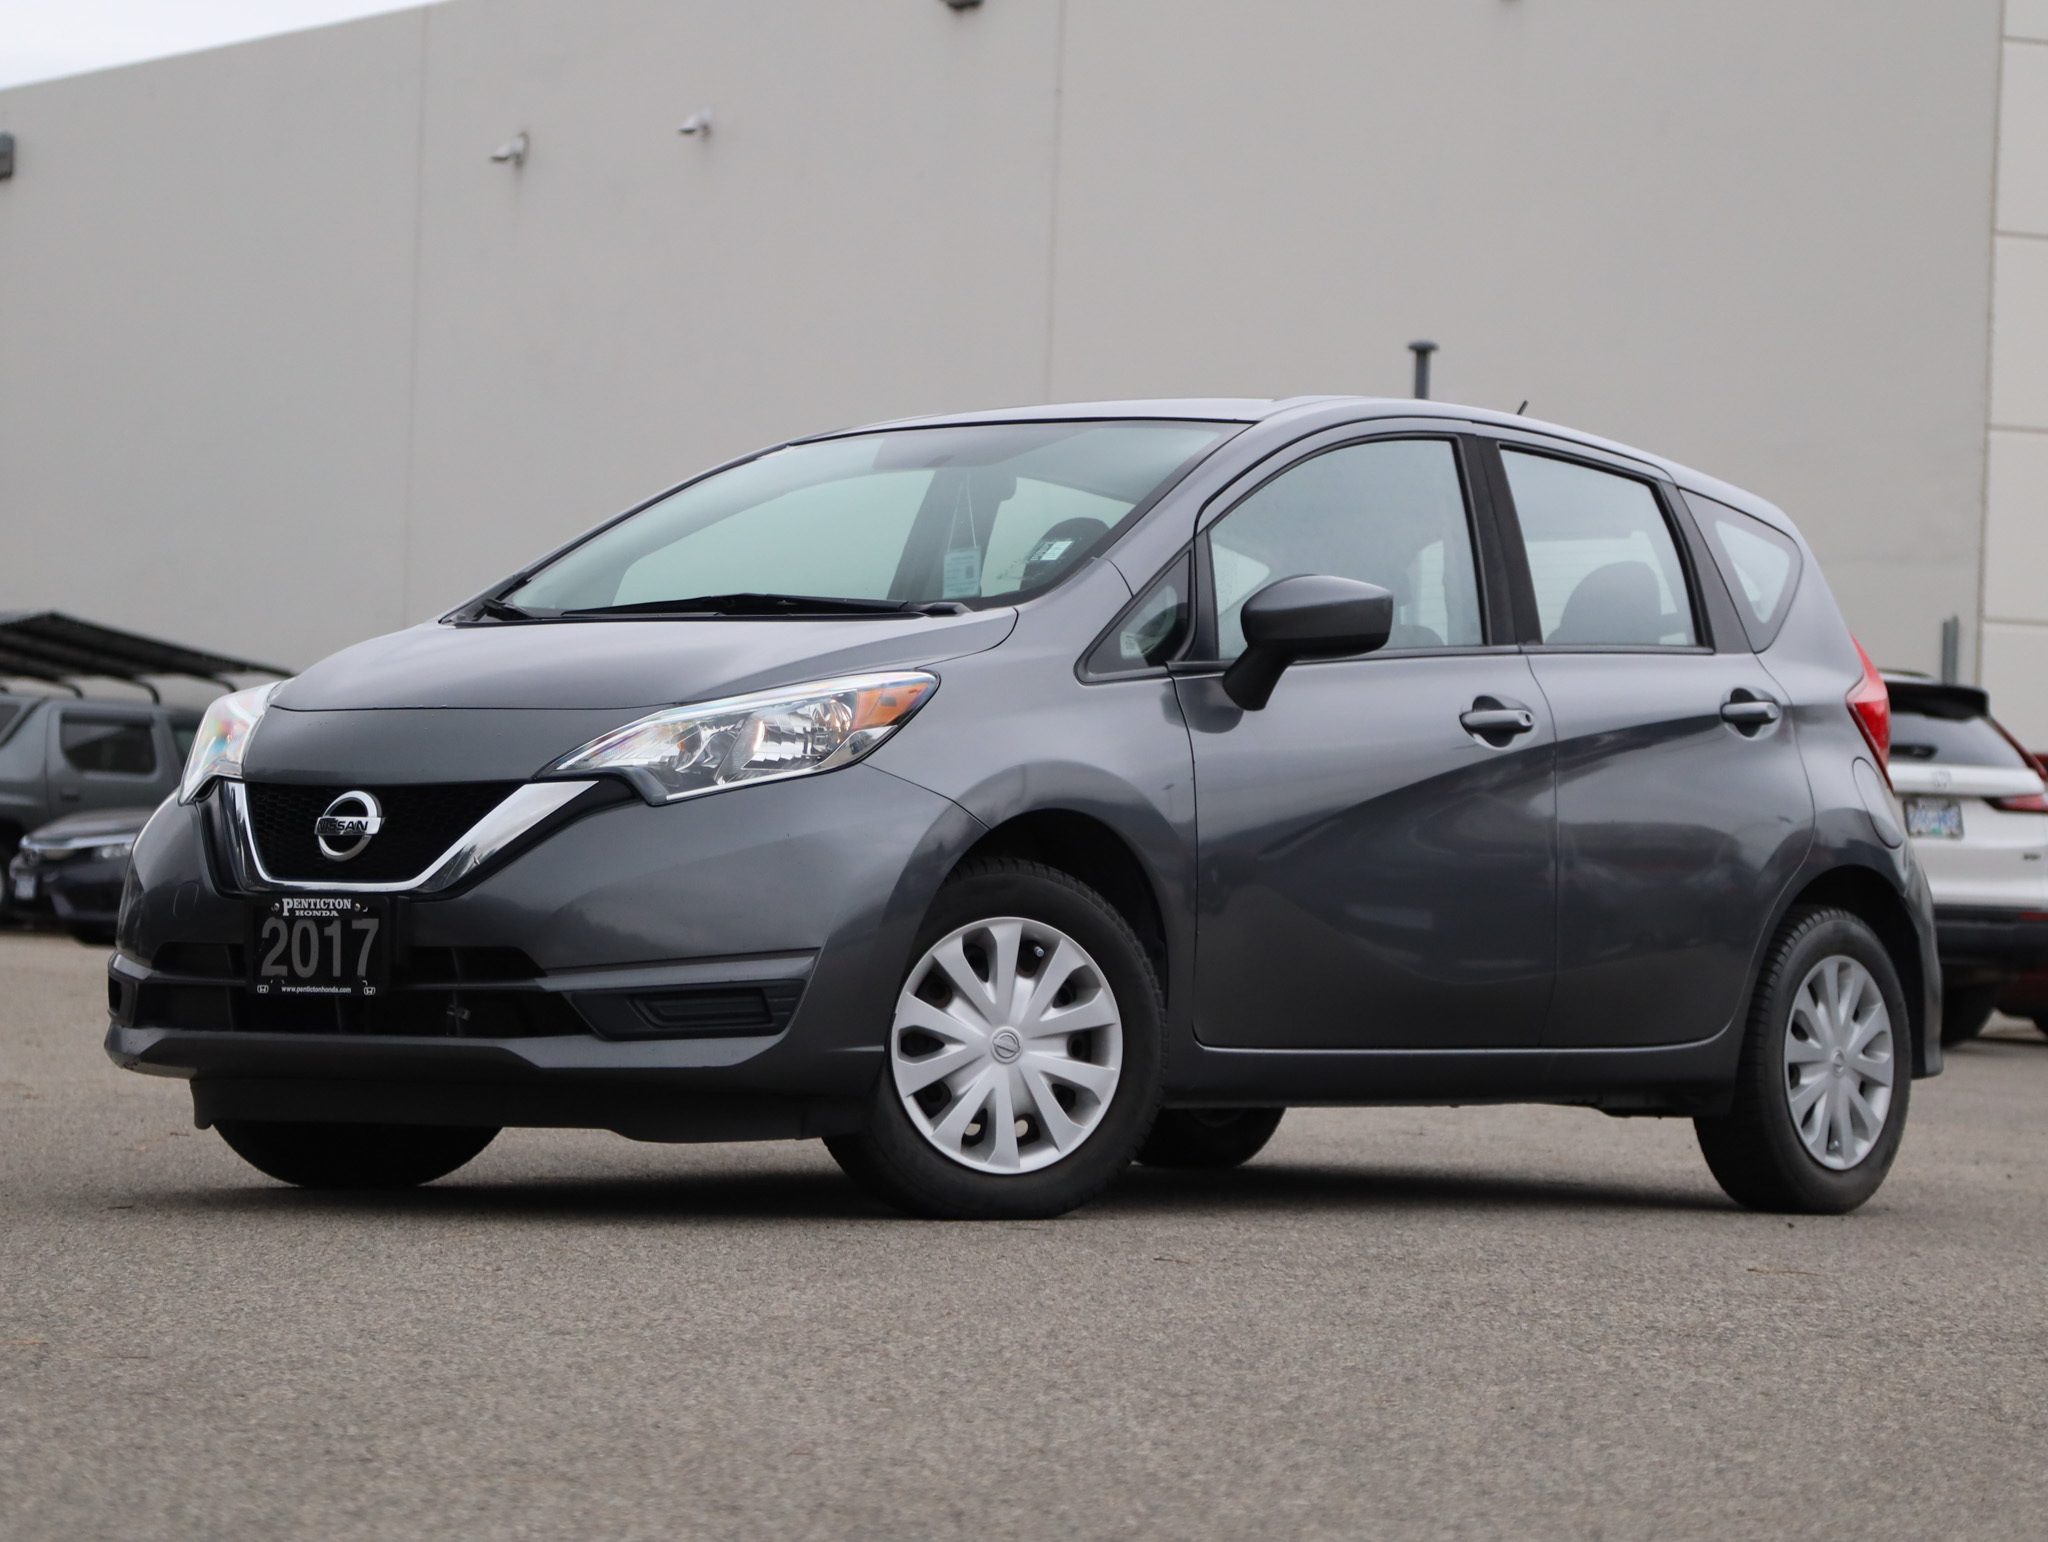 2017 Nissan Versa Note - No Accidents / 5-Speed Manual / FWD